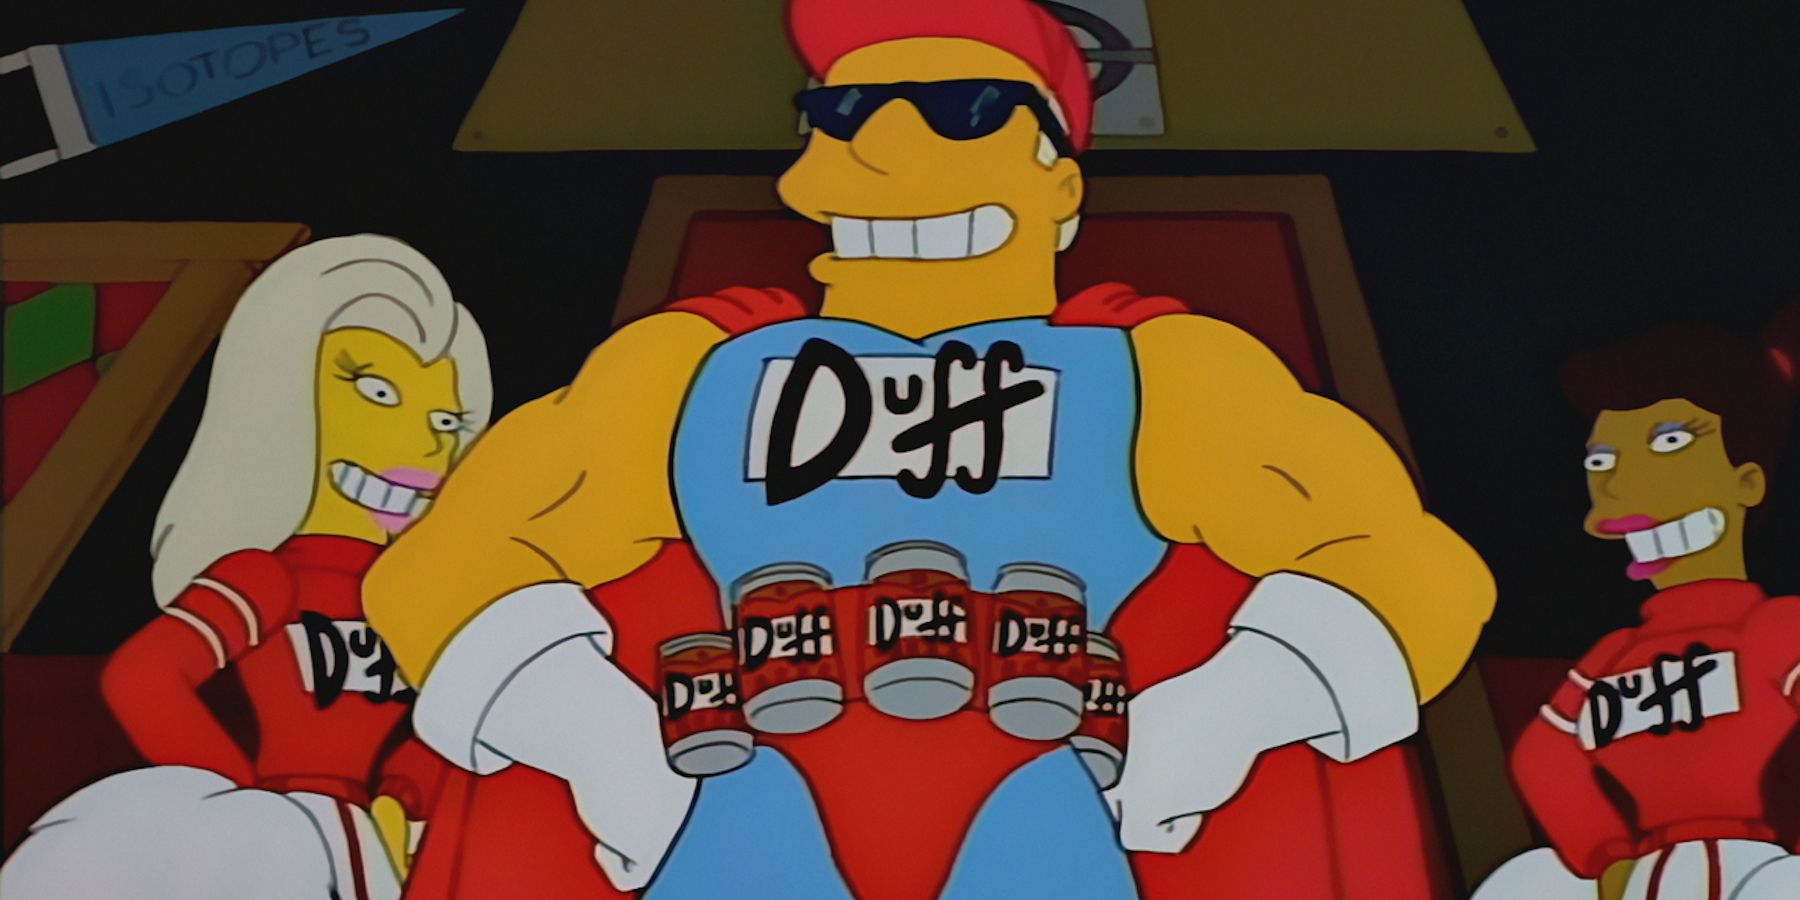 Duffman smiling with his hands on his waist and two girls behind him in The Simpsons